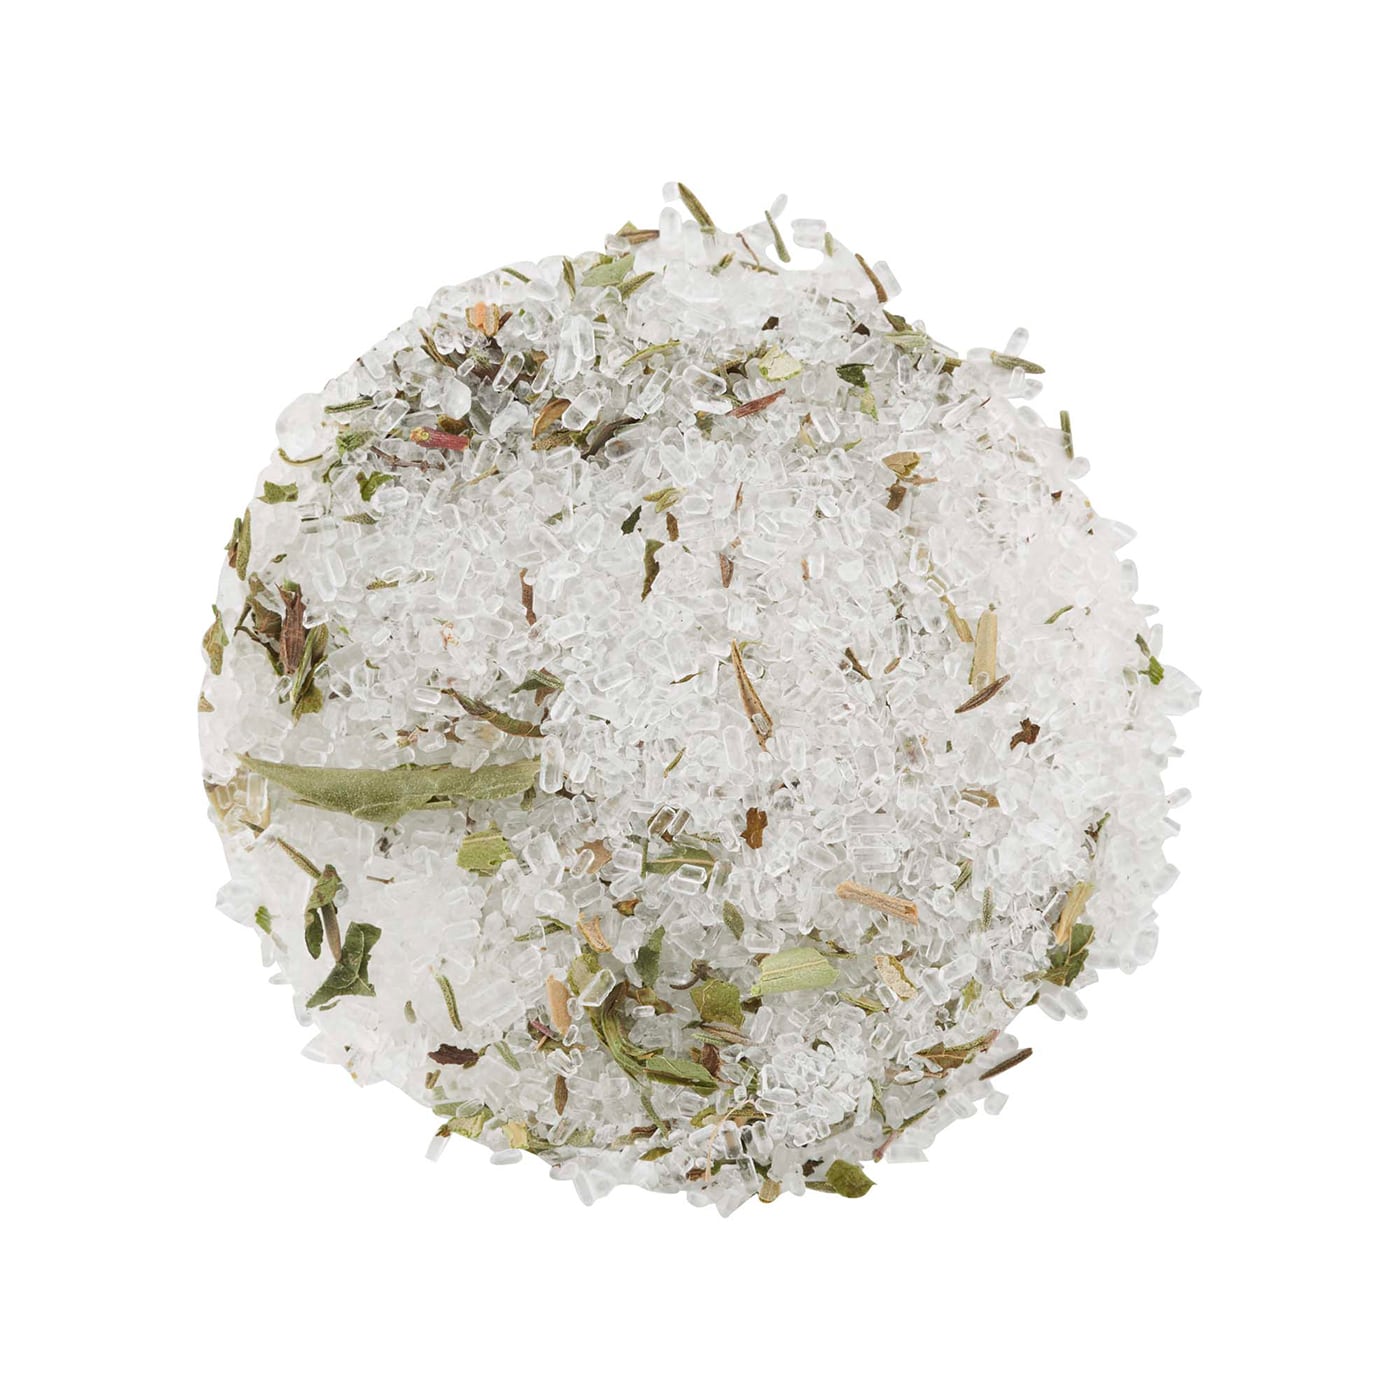 Breathe Bath Salts | For Respiratory Support